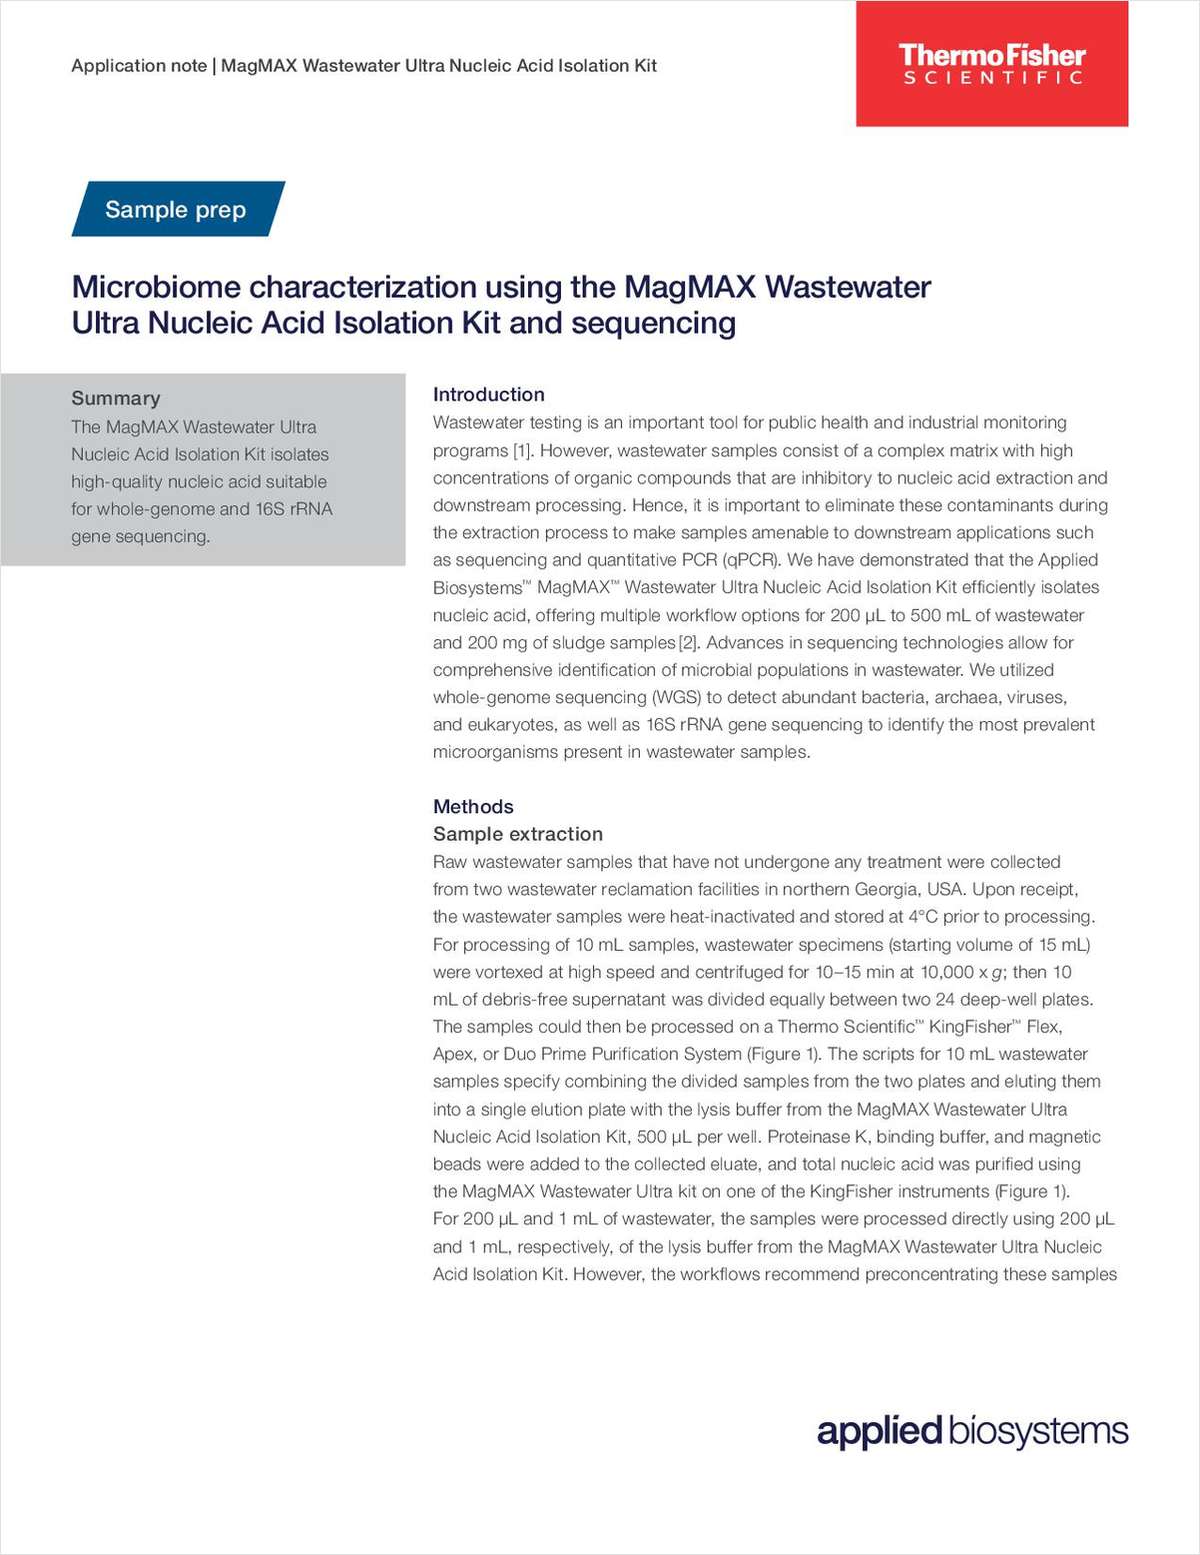 Microbiome Characterization Using the MagMax Wastewater Ultra Nucleic Acid Isolation Kit and Sequencing